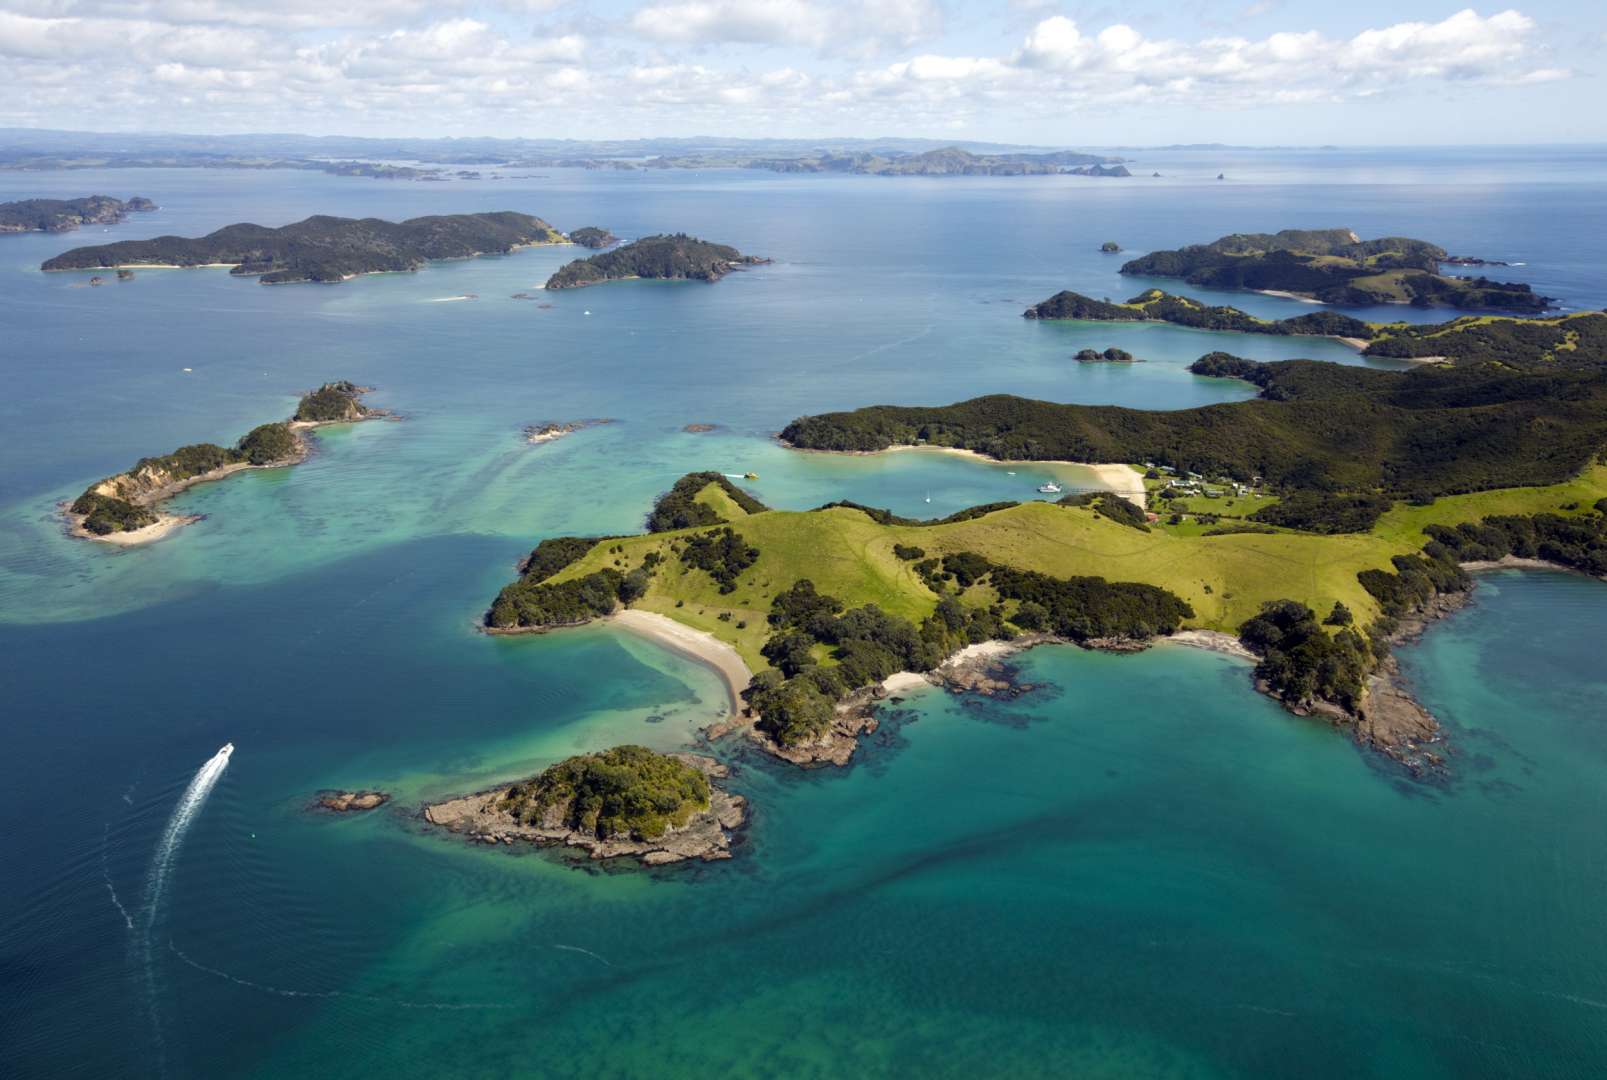 The Bay of Islands has 144 Sheltered Islands